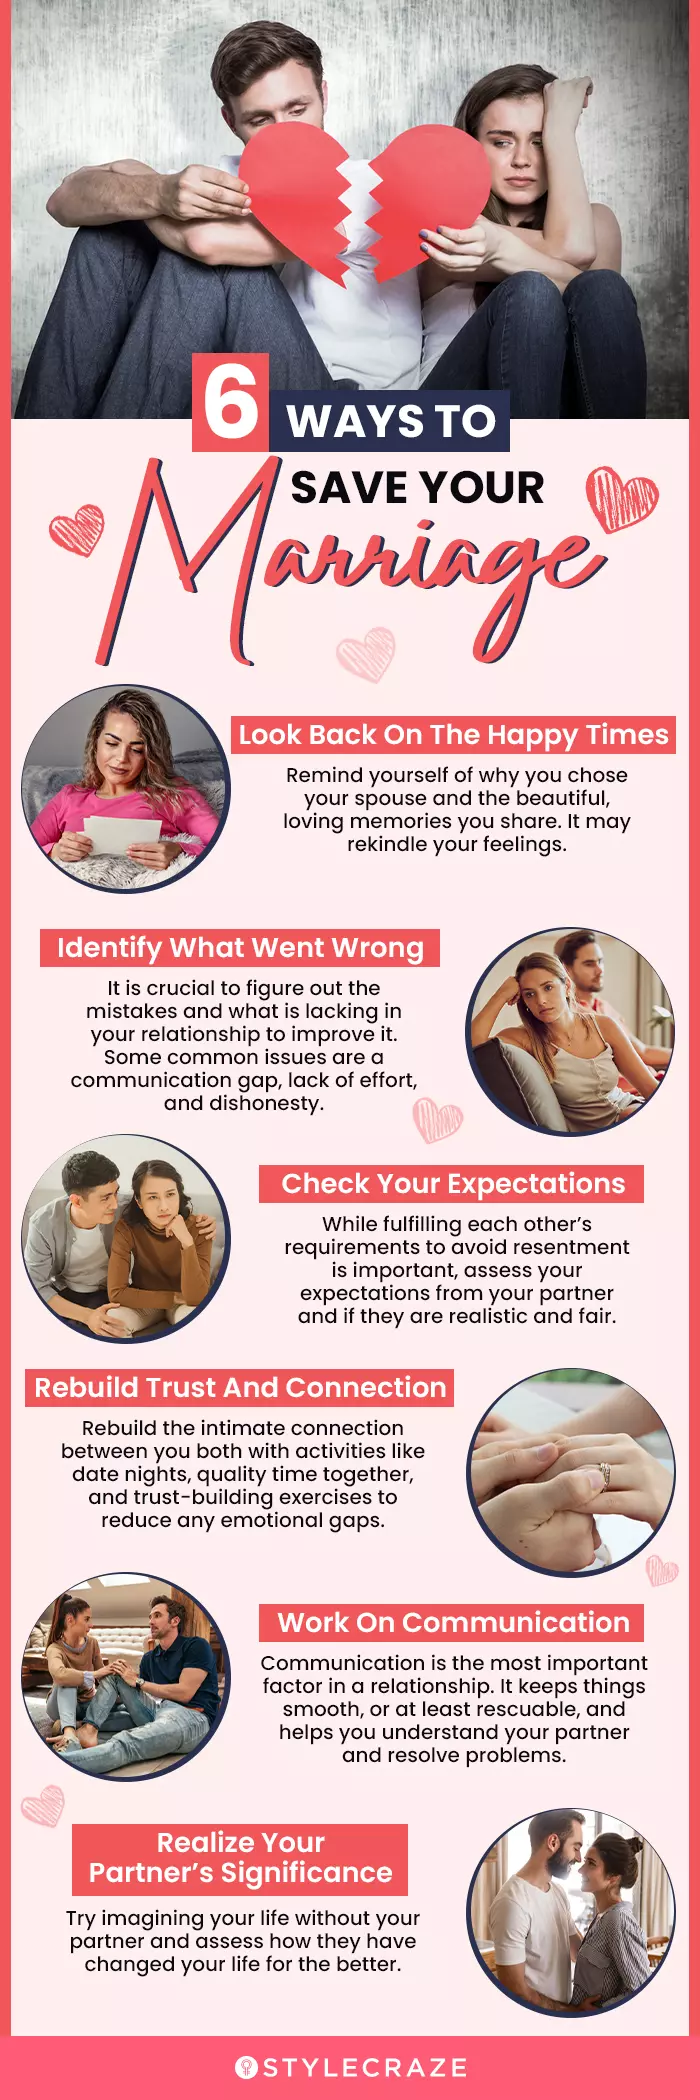 6 ways to save your marriage (infographic)